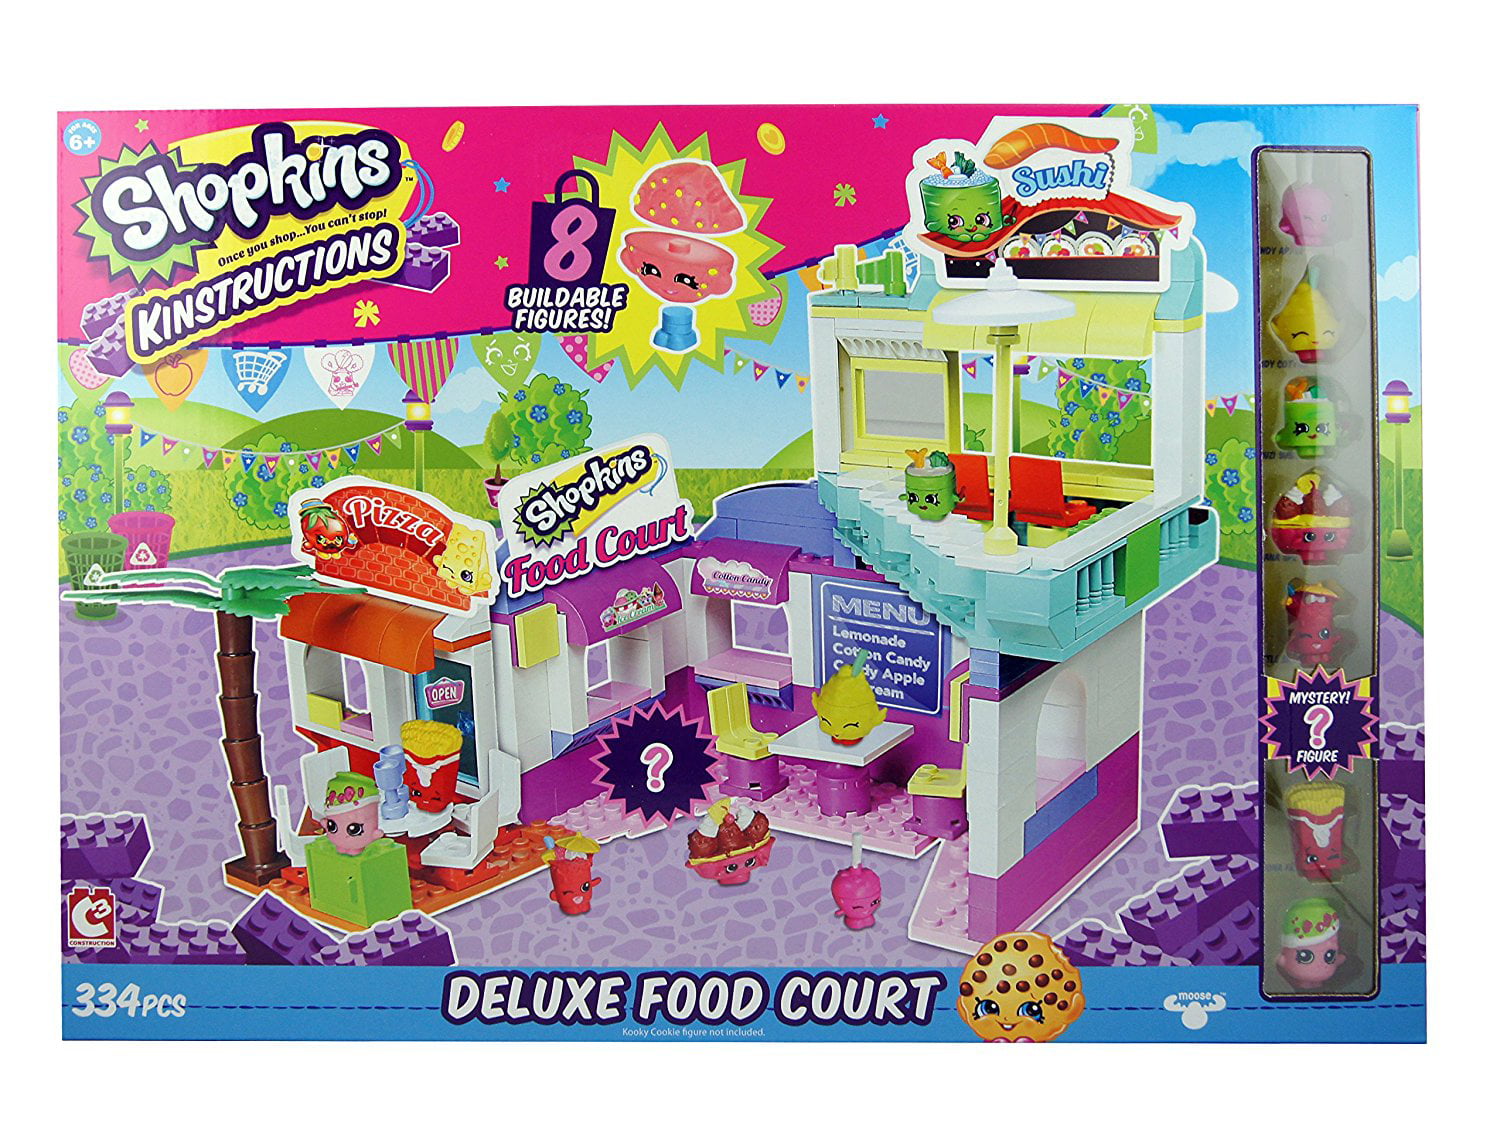 Factory Sealed! Shopkins Kin'struckins Deluxe Food Court Playset Ships Fast 